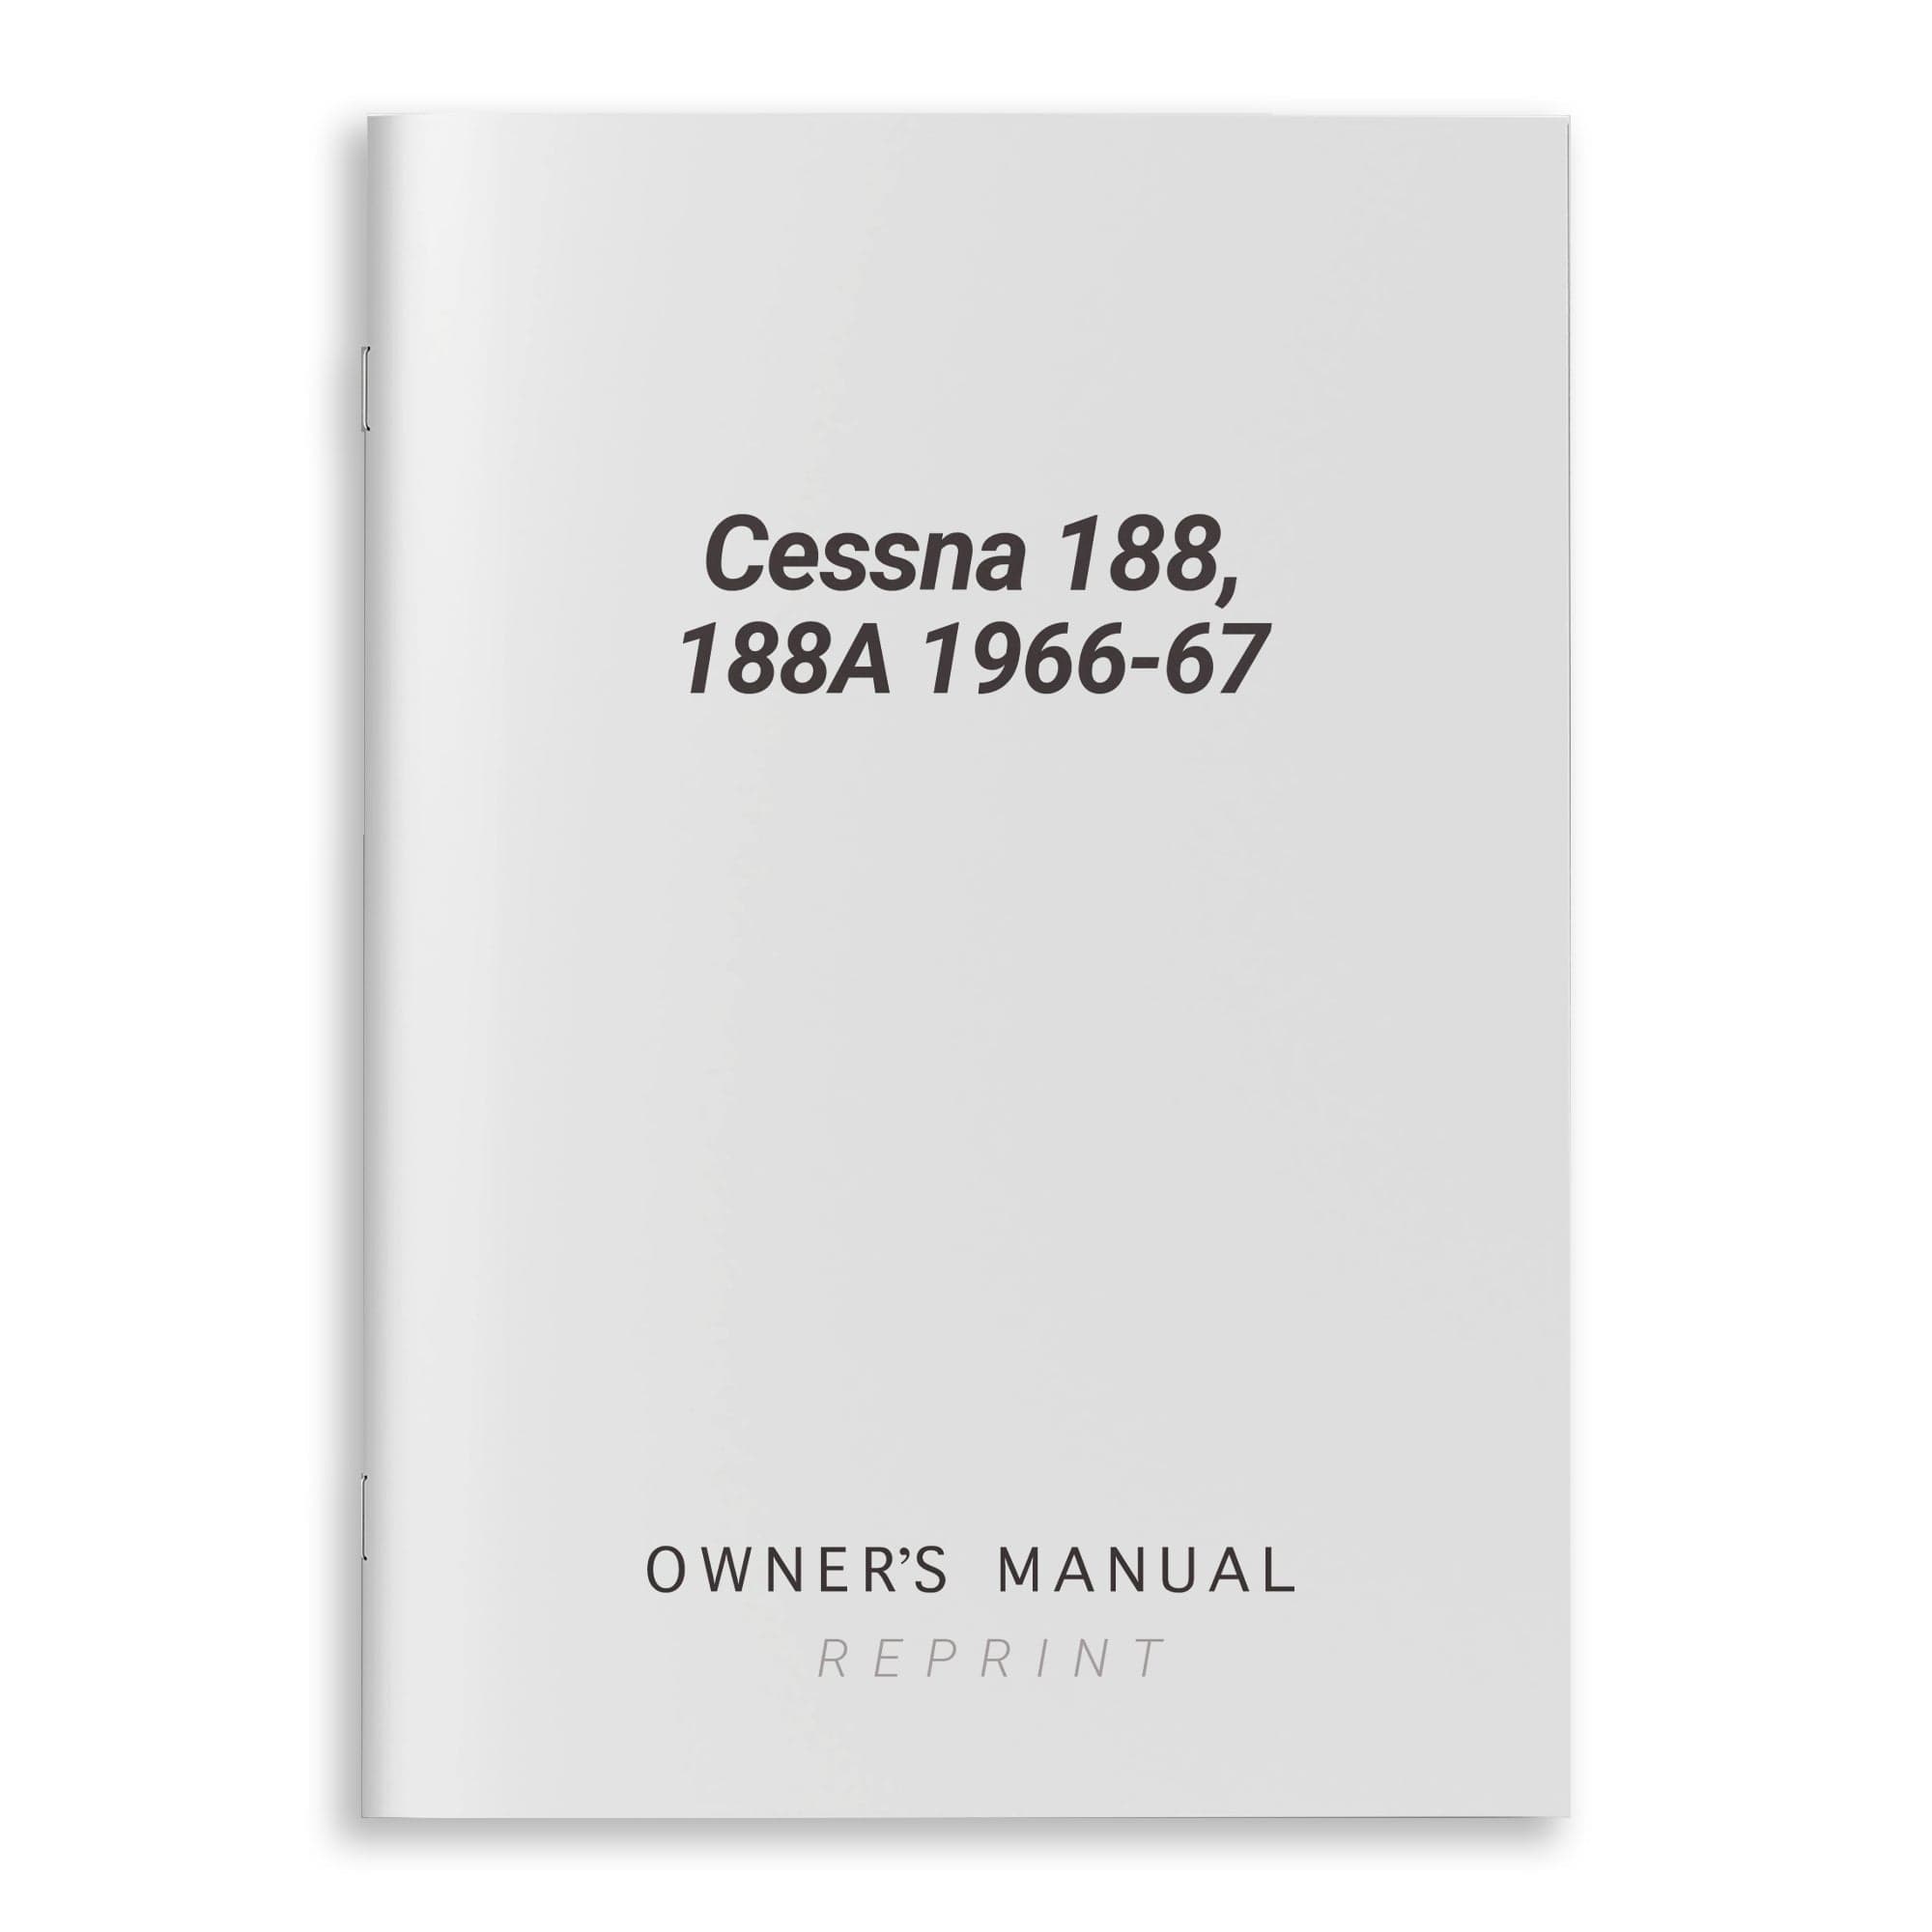 Cessna 188, 188A 1966-67 Owner's Manual